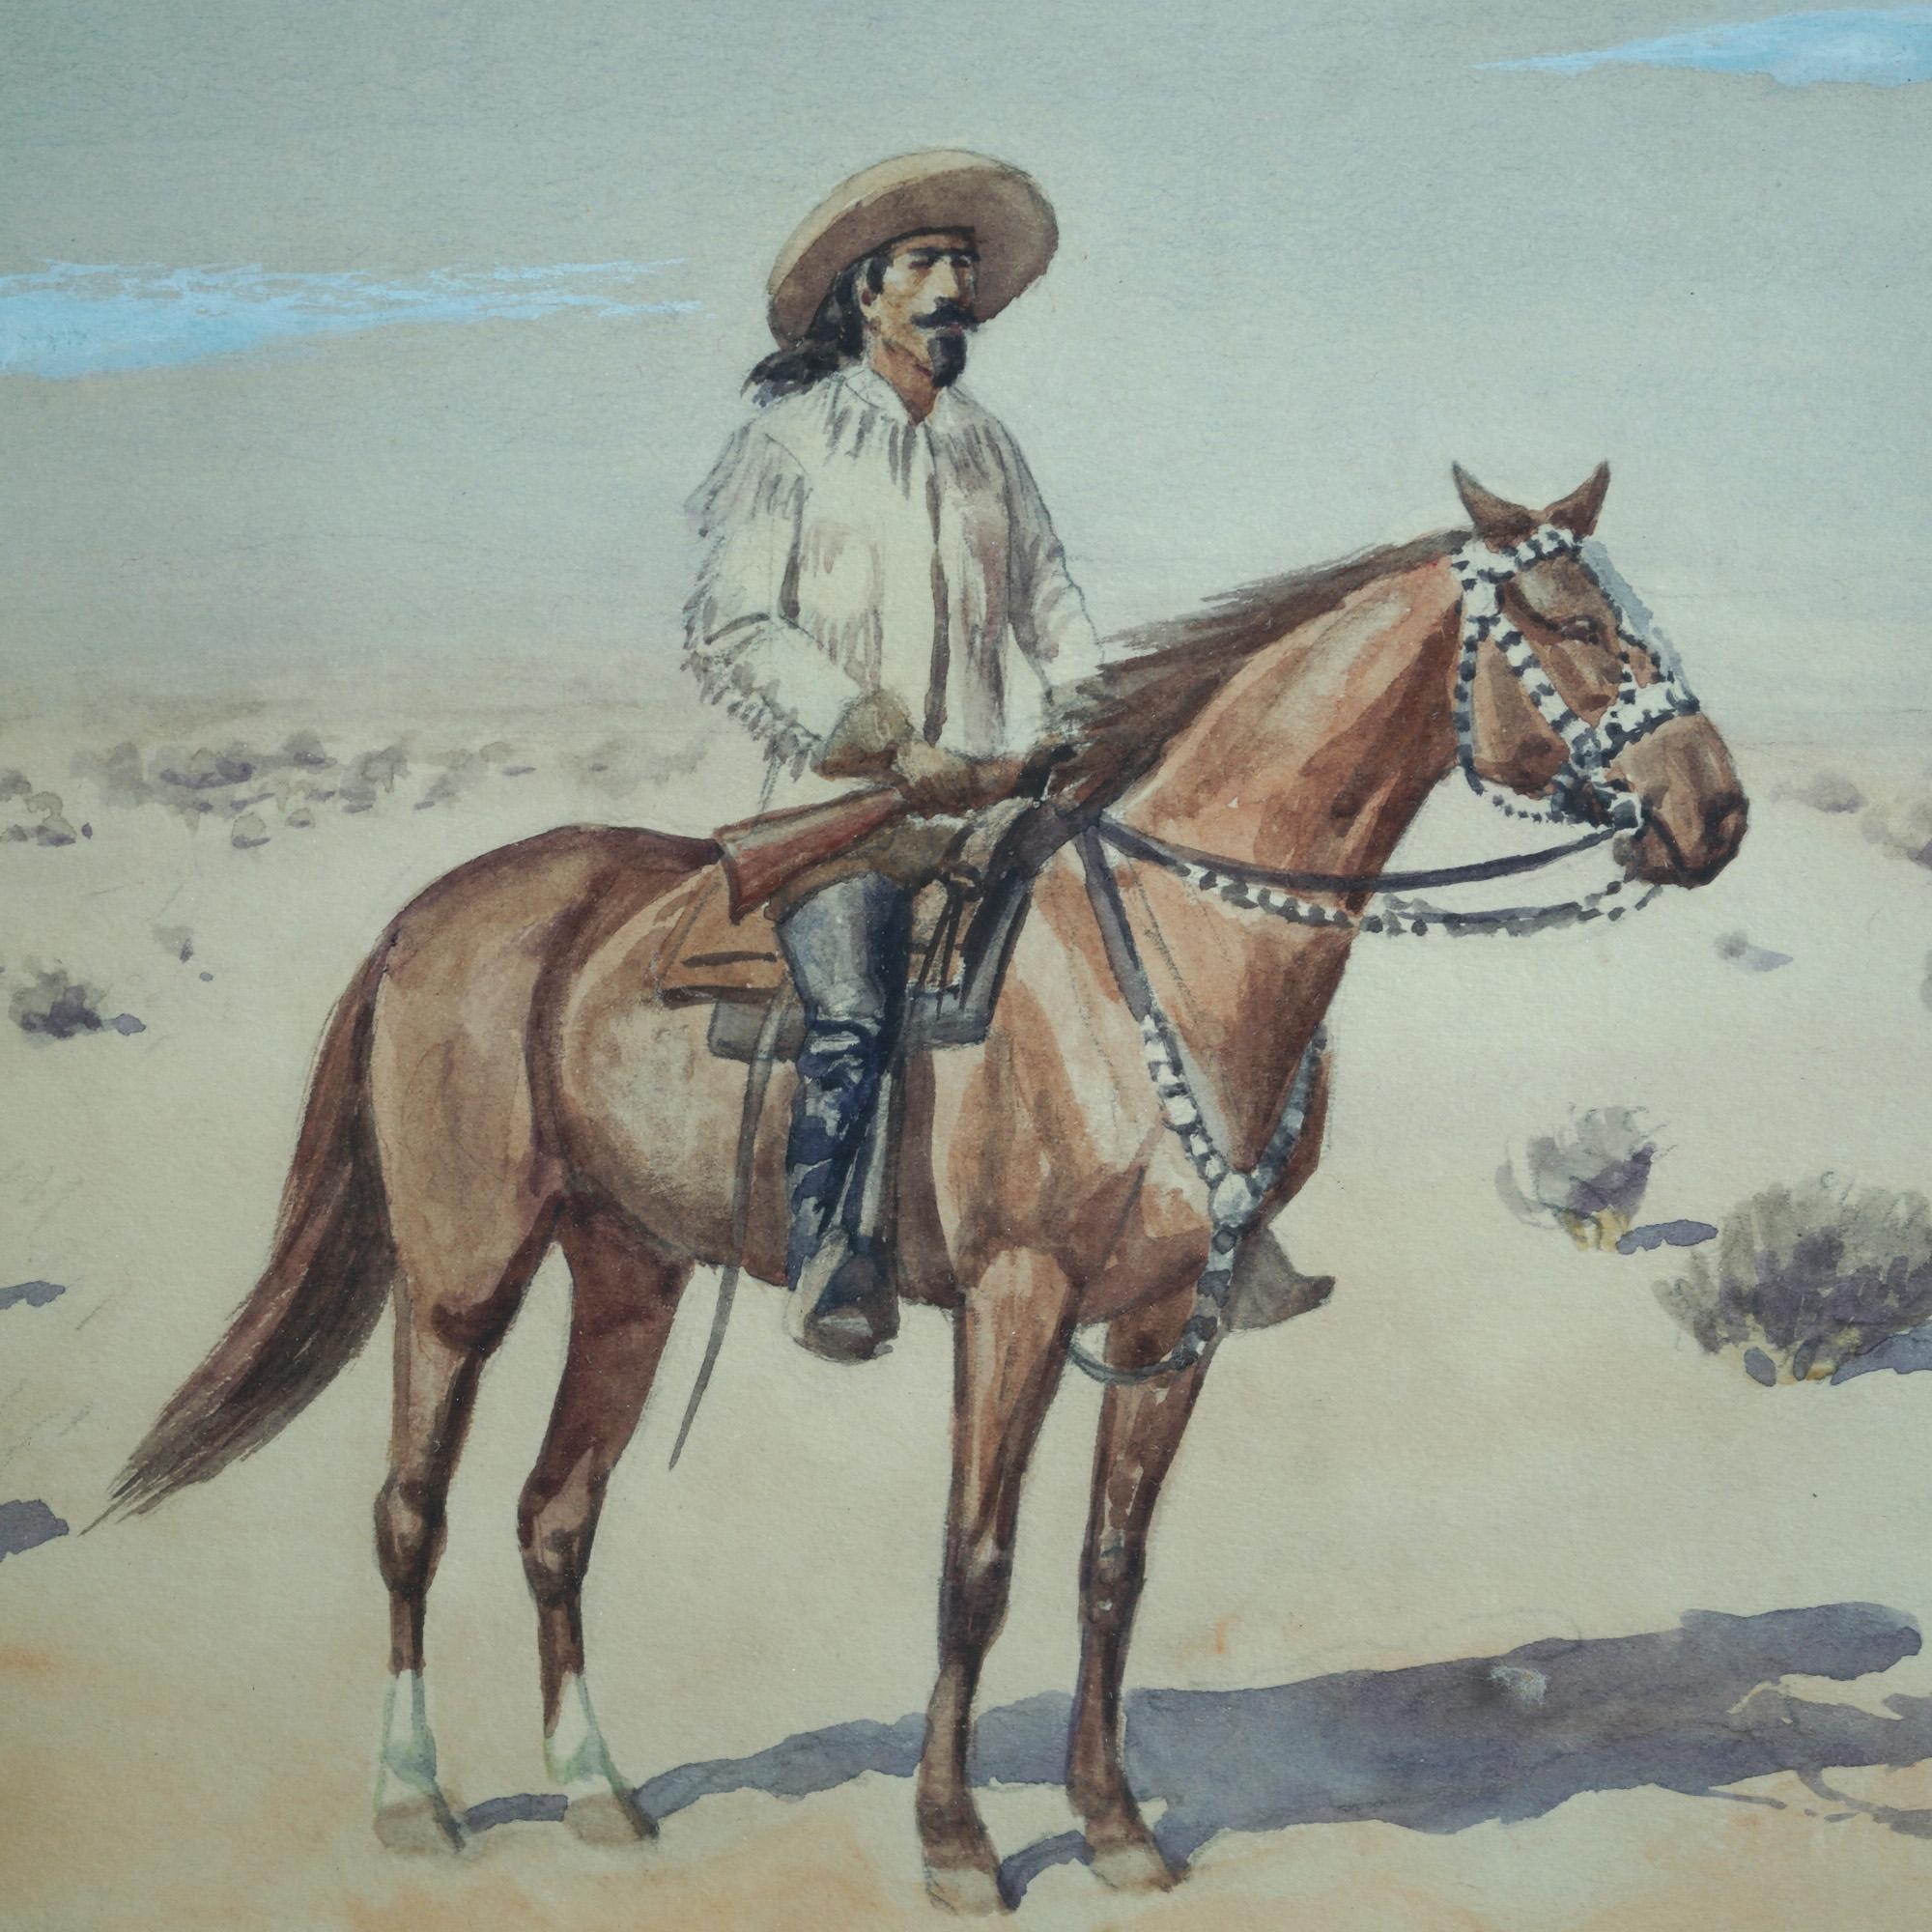 Western Theme Desert Landscape Watercolor Painting with Horse & Rider, Buffalo Bill Cody General Miles, signed Leonard Howard Reedy, 20th C

Measures- 17.25''H x 20''W x 2''D